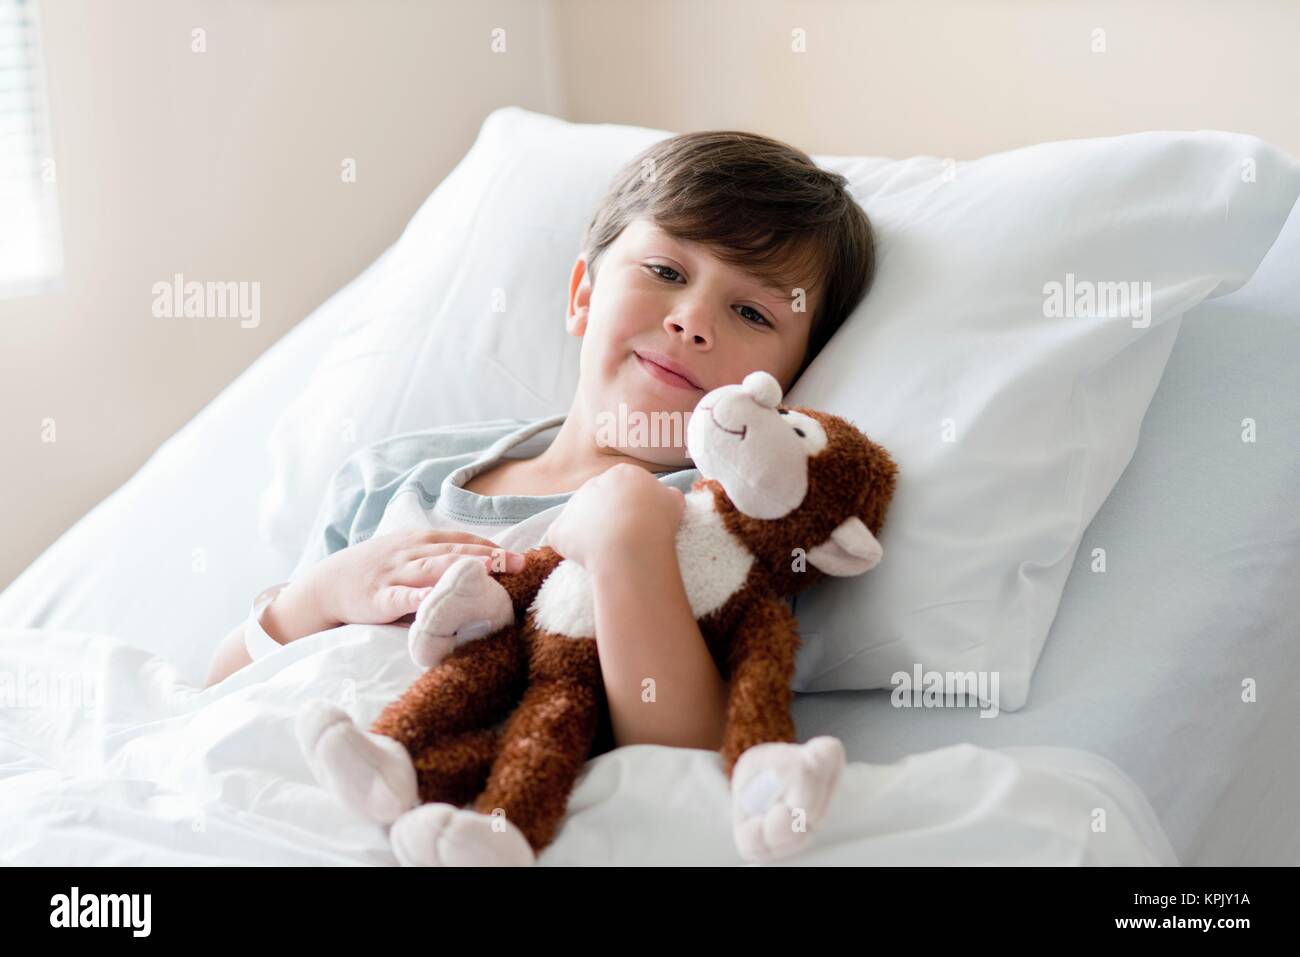 Young boy in hospital bed with teddy bear. Stock Photo